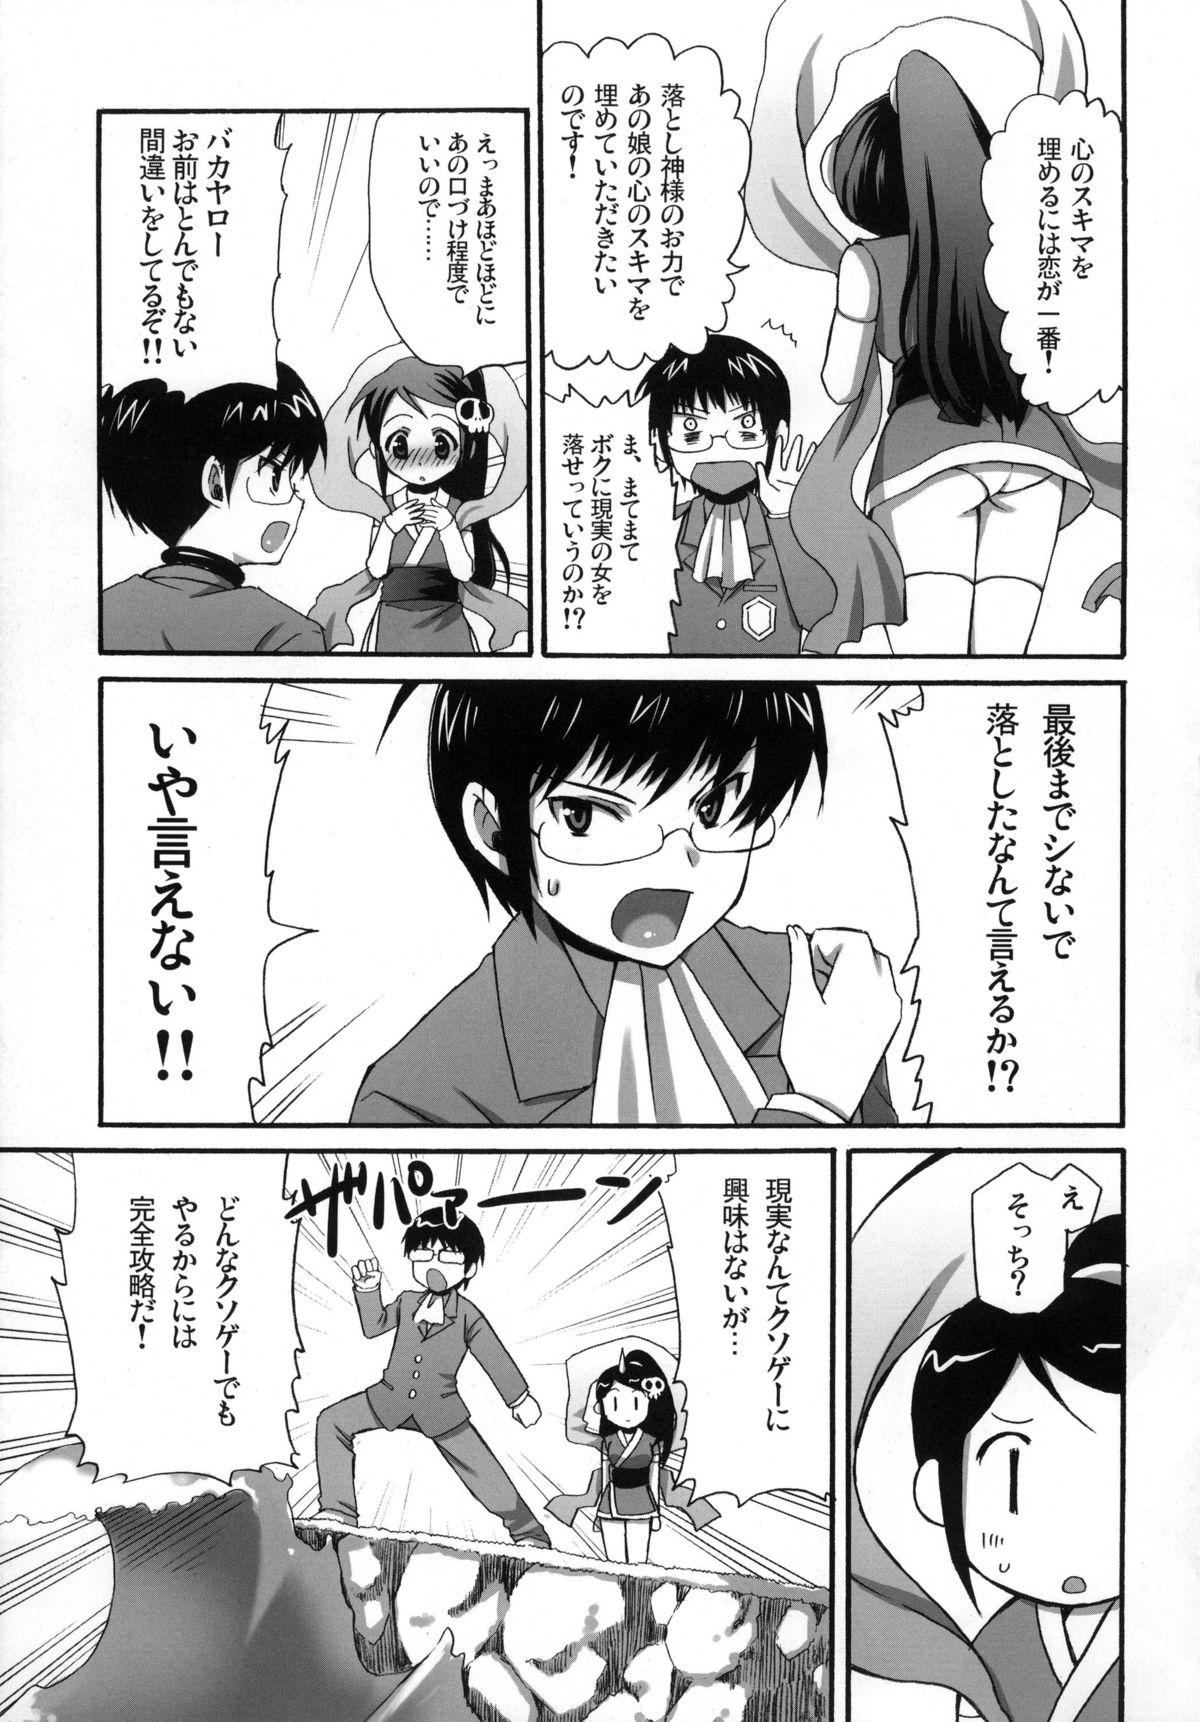 Room Kami Nomi zo Fullcomp - The world god only knows Arabe - Page 5